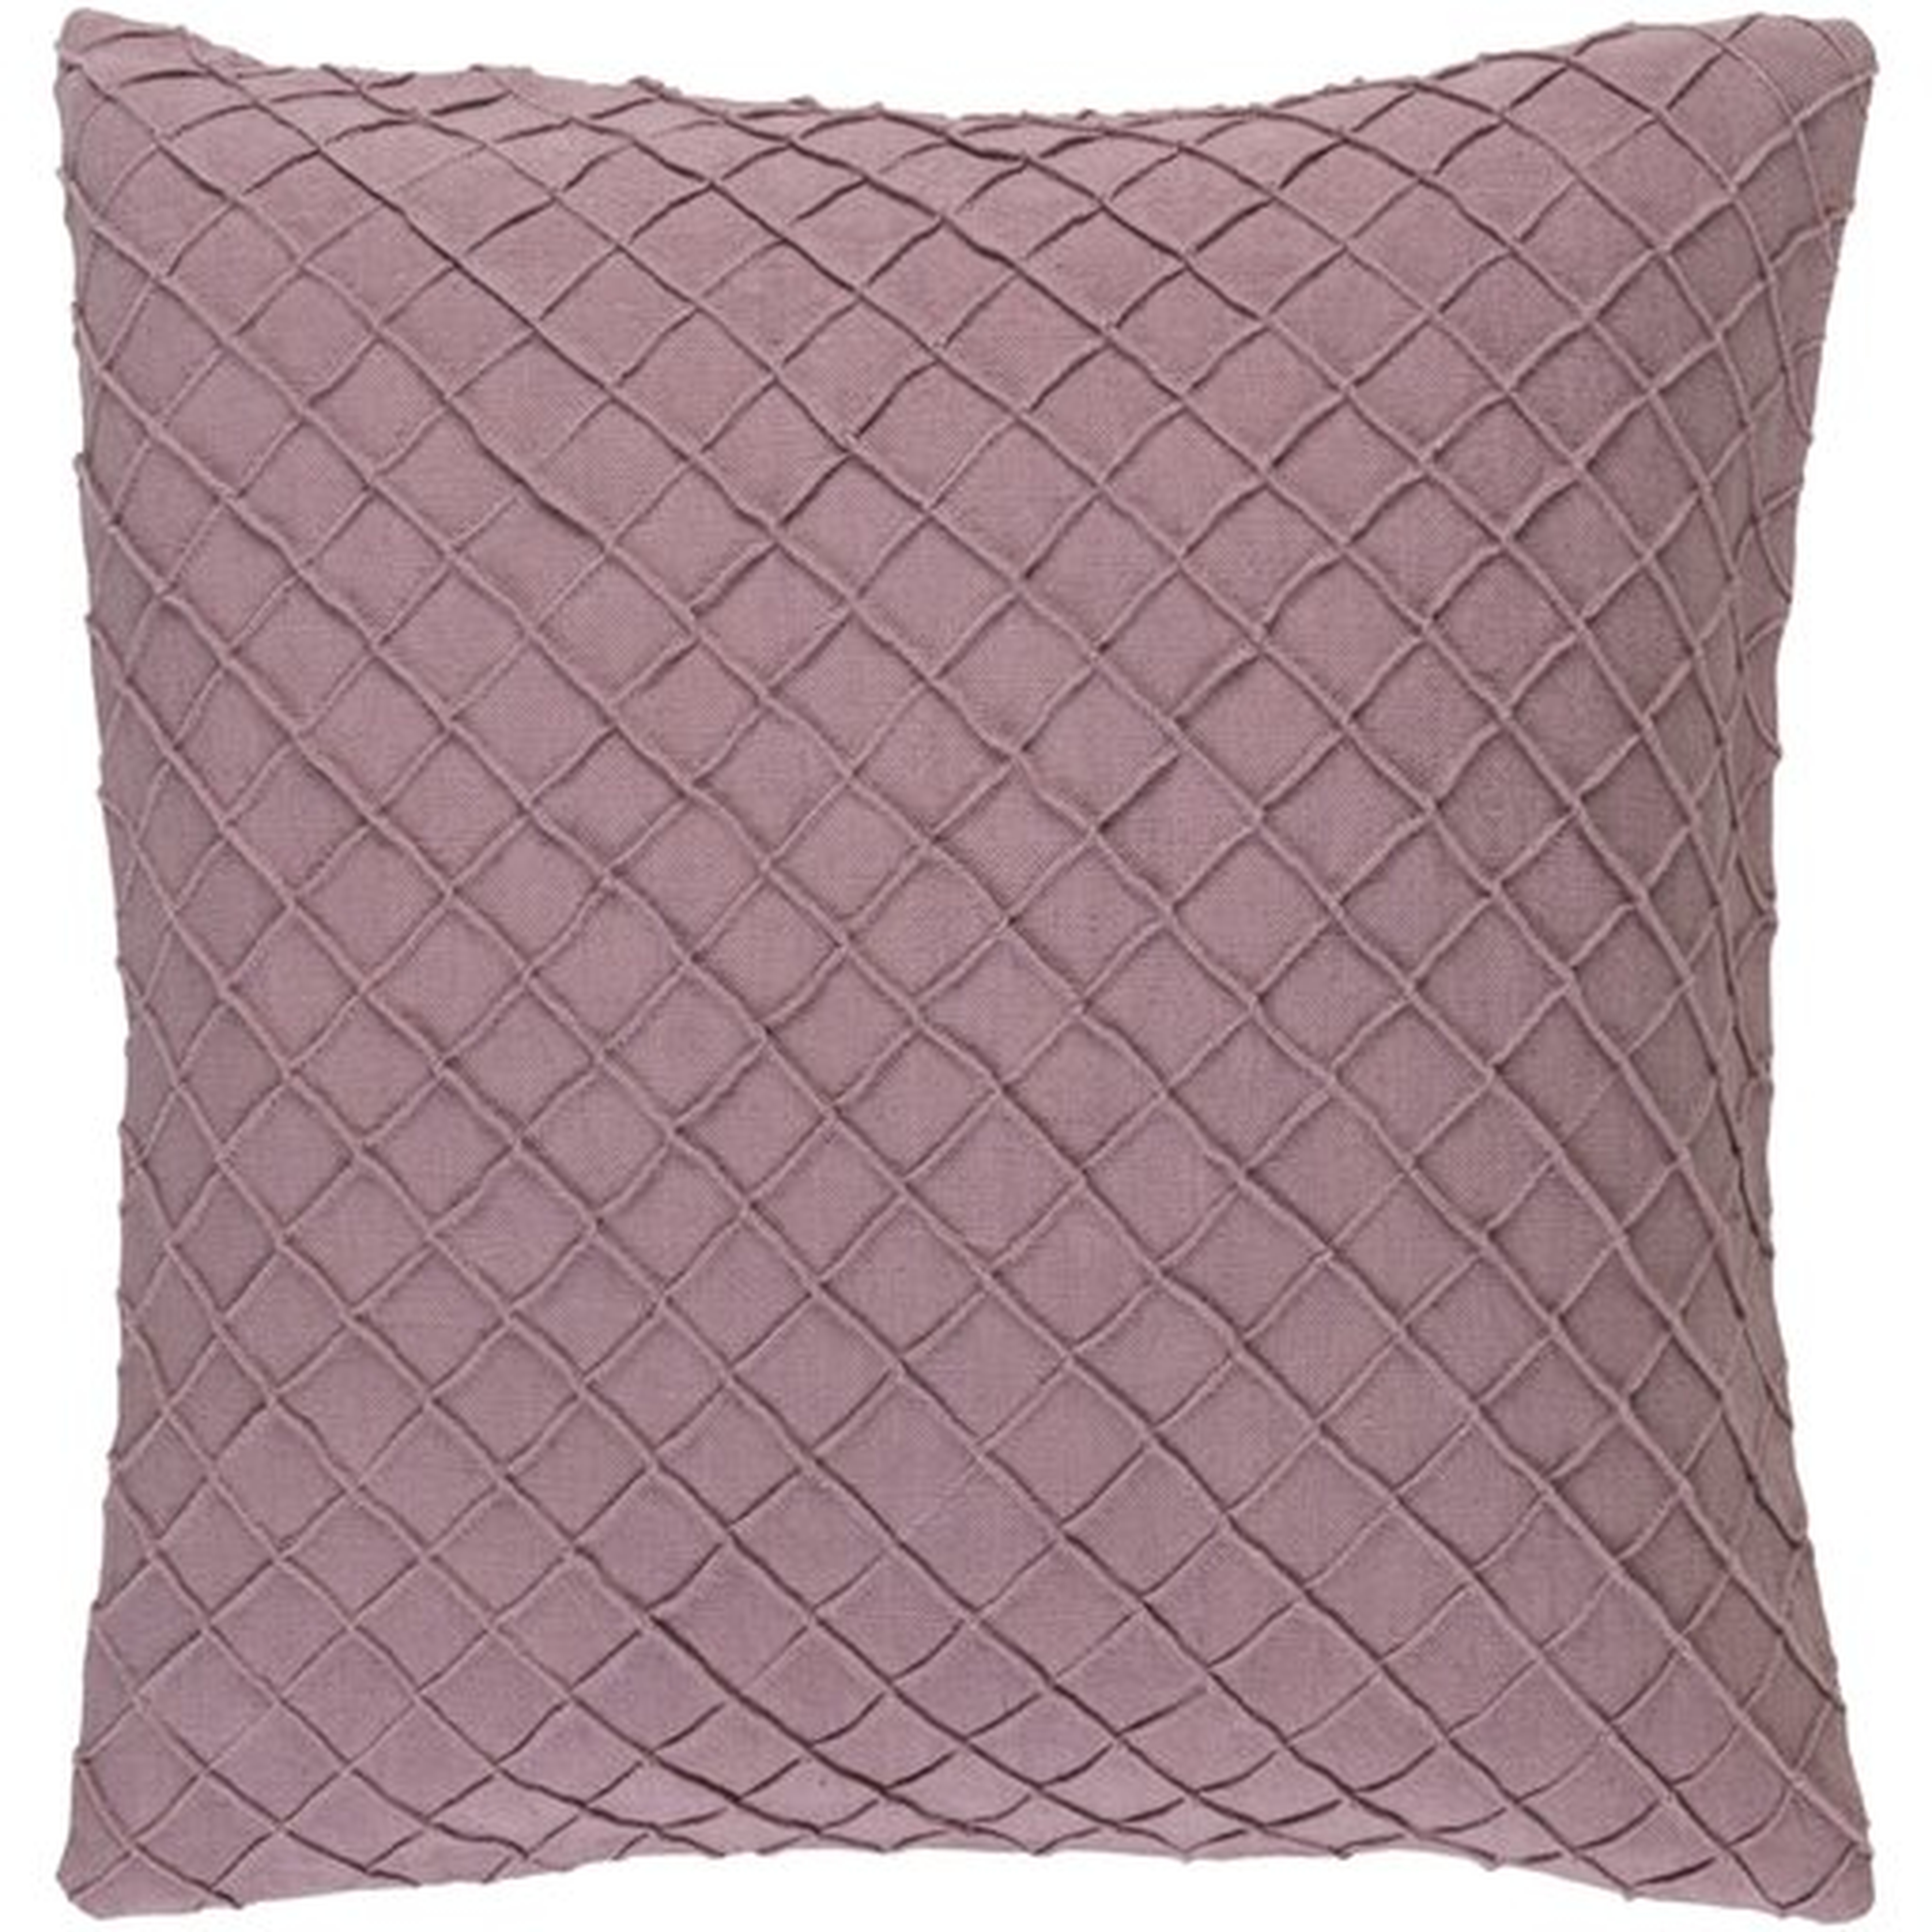 Wright Throw Pillow, 22" x 22", with poly insert - Surya